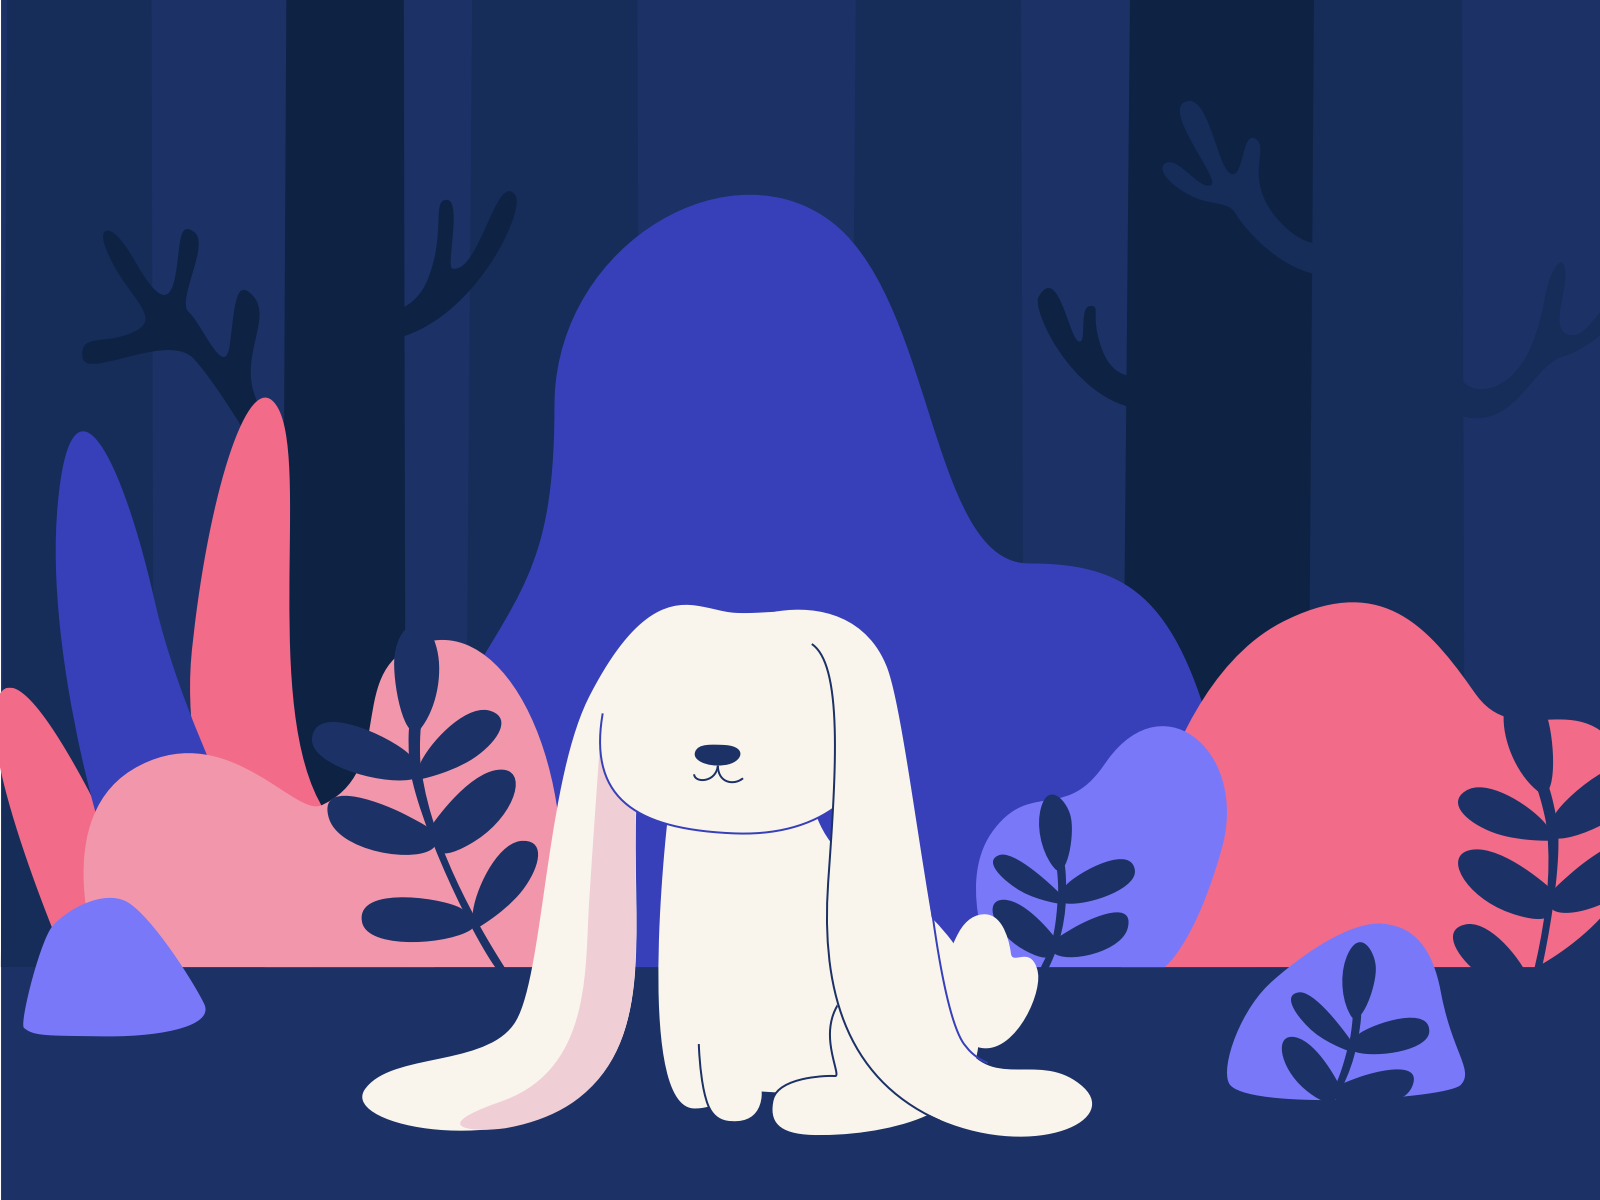 Cute Bunny by Julia Packan for Awsmd on Dribbble